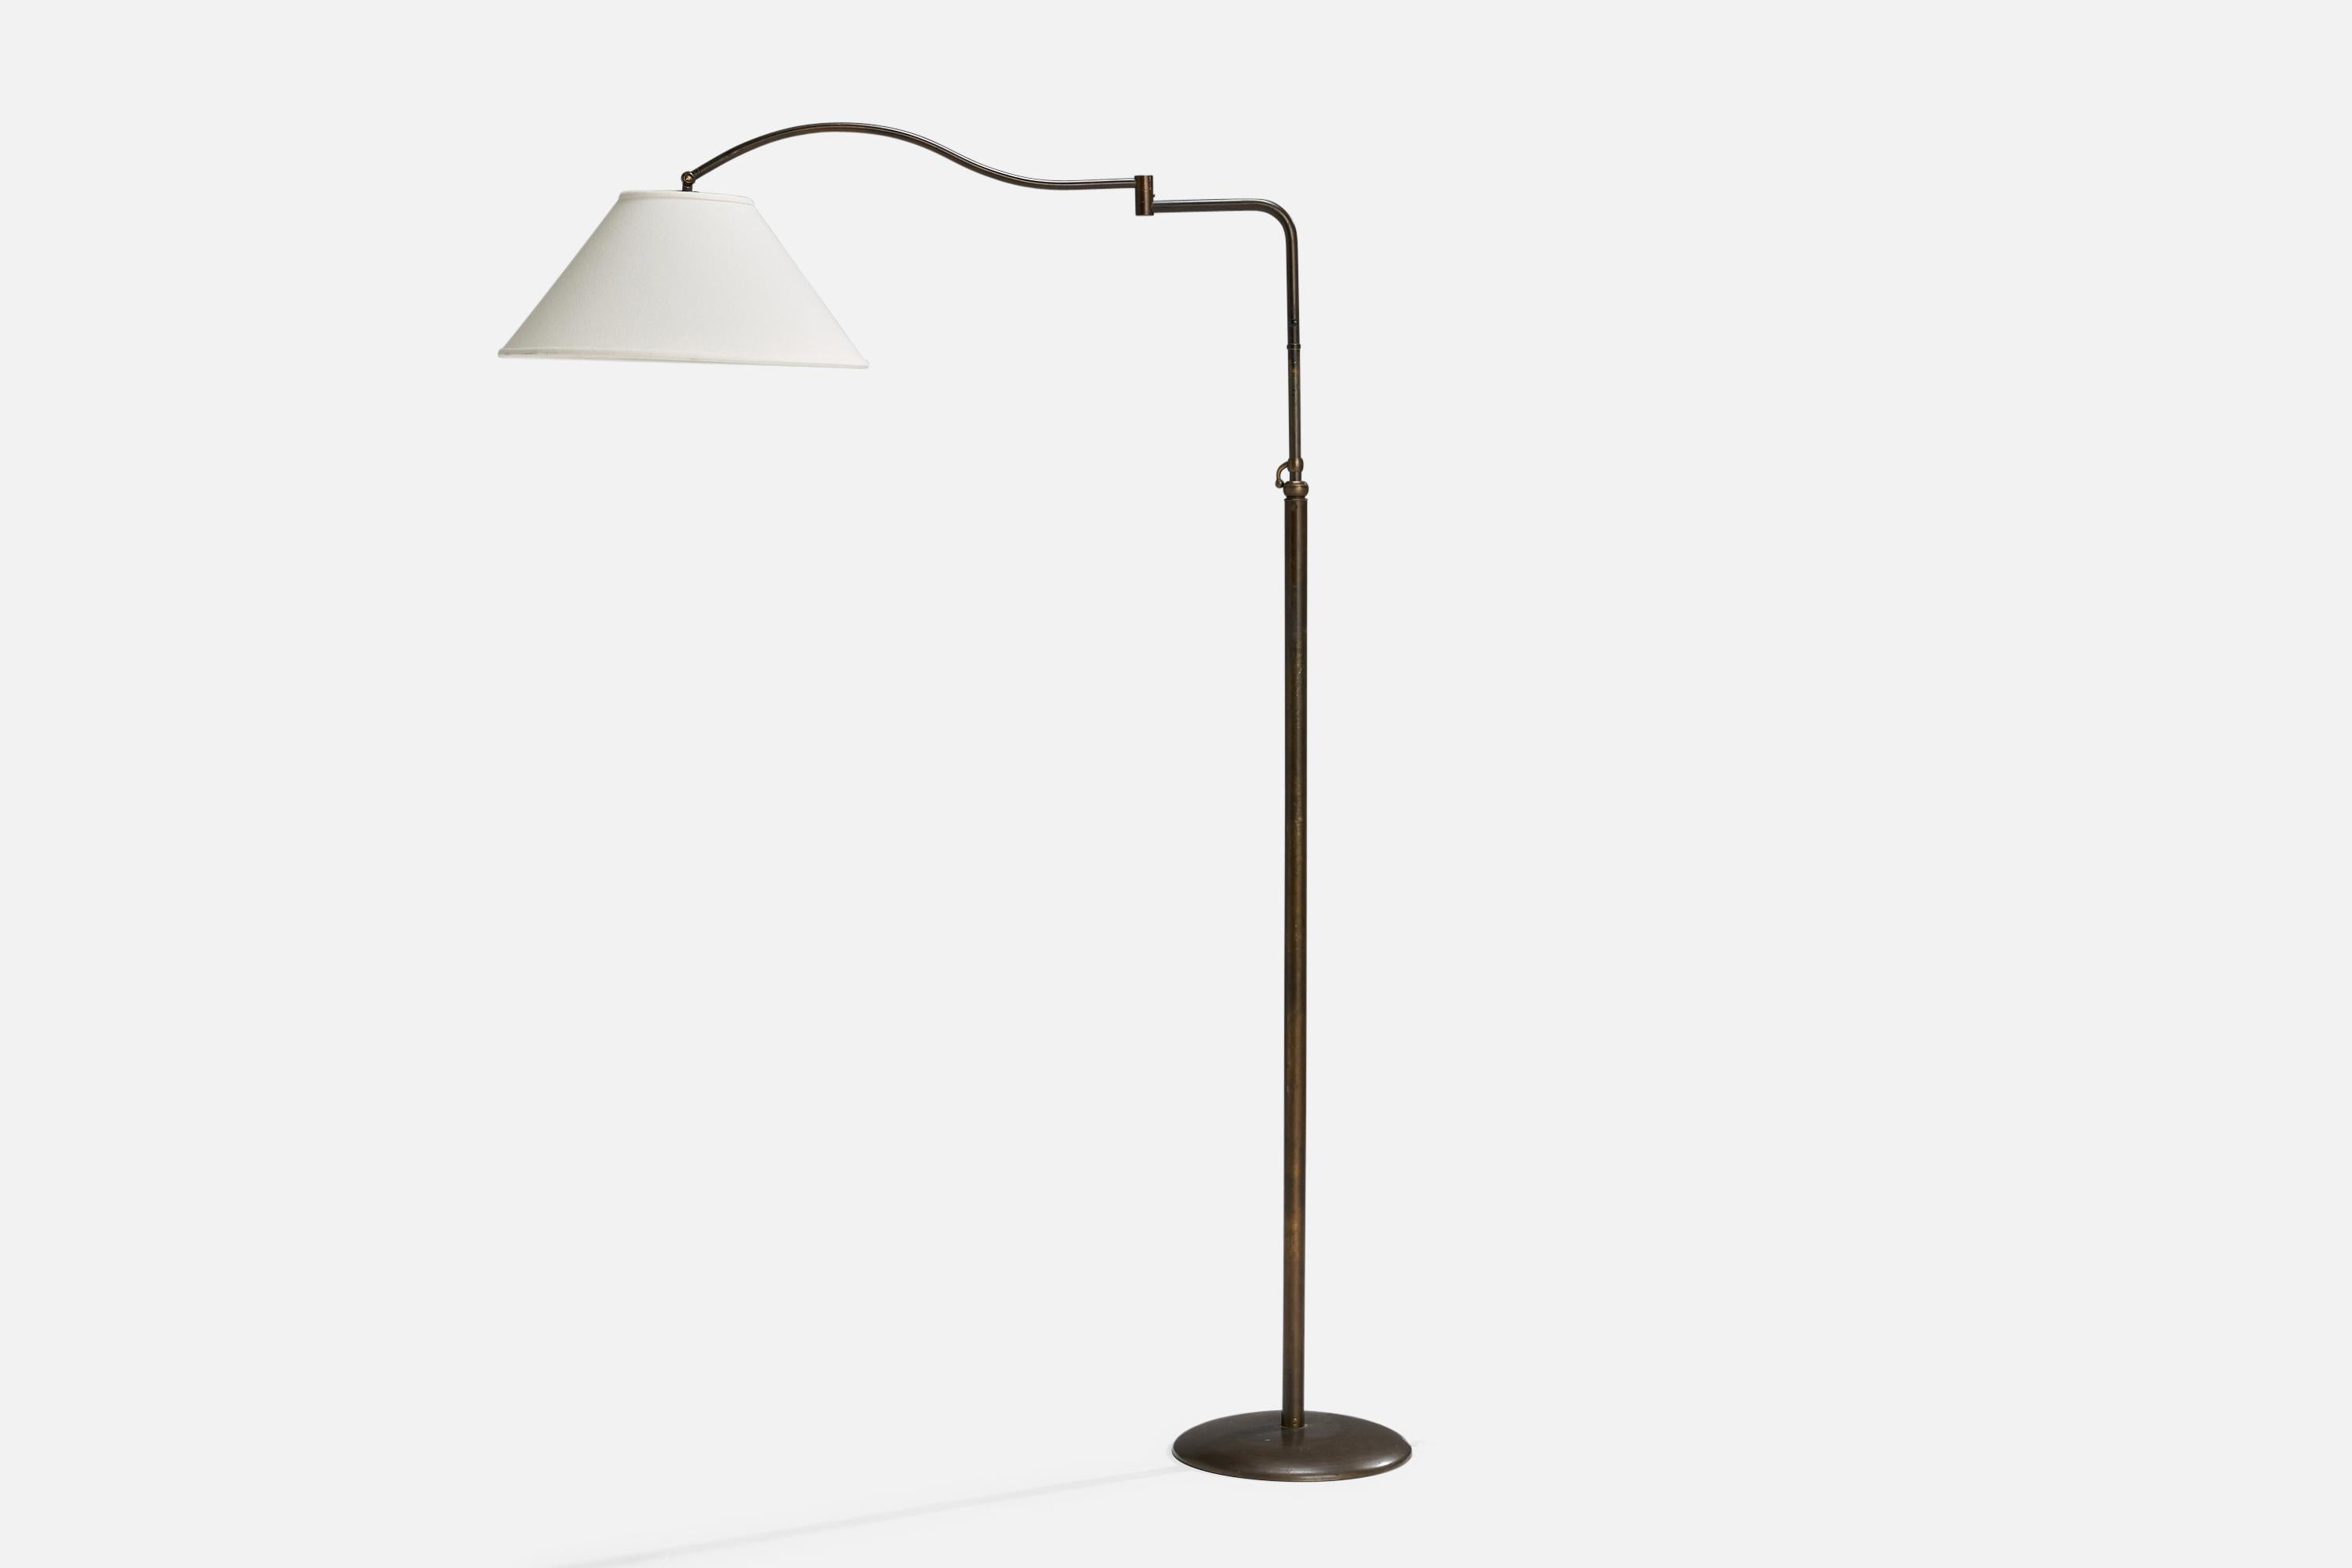 An adjustable brass and white fabric floor lamp designed and produced in Italy, 1940s.

Overall Dimensions (inches): 68” H x 18” W x 32” D
Stated dimensions include shade.
Bulb Specifications: E-26 Bulb
Number of Sockets: 1
All lighting will be